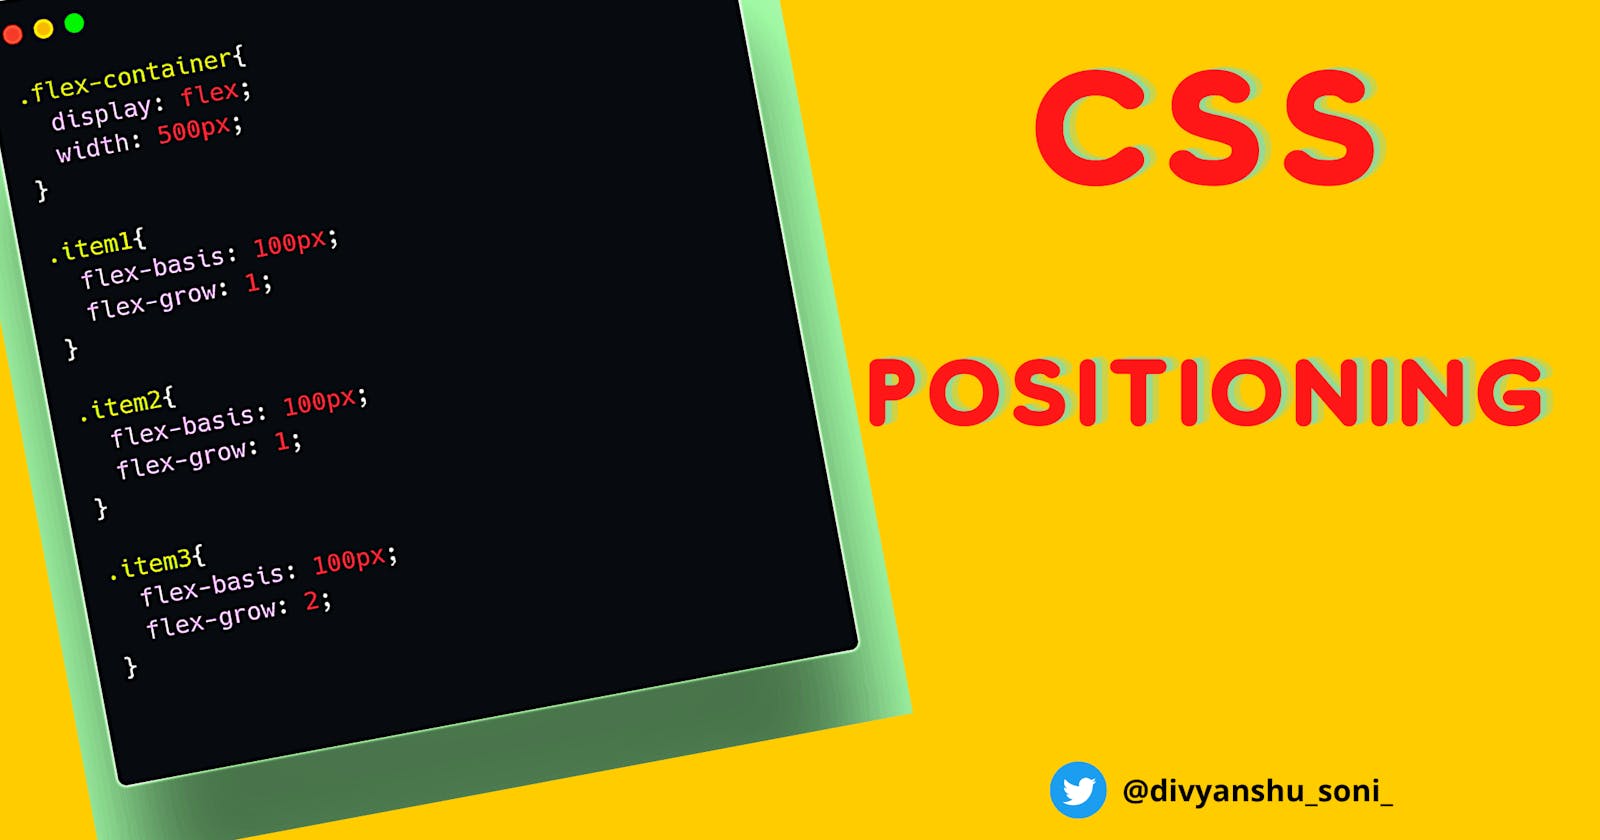 Master CSS positioning right now!